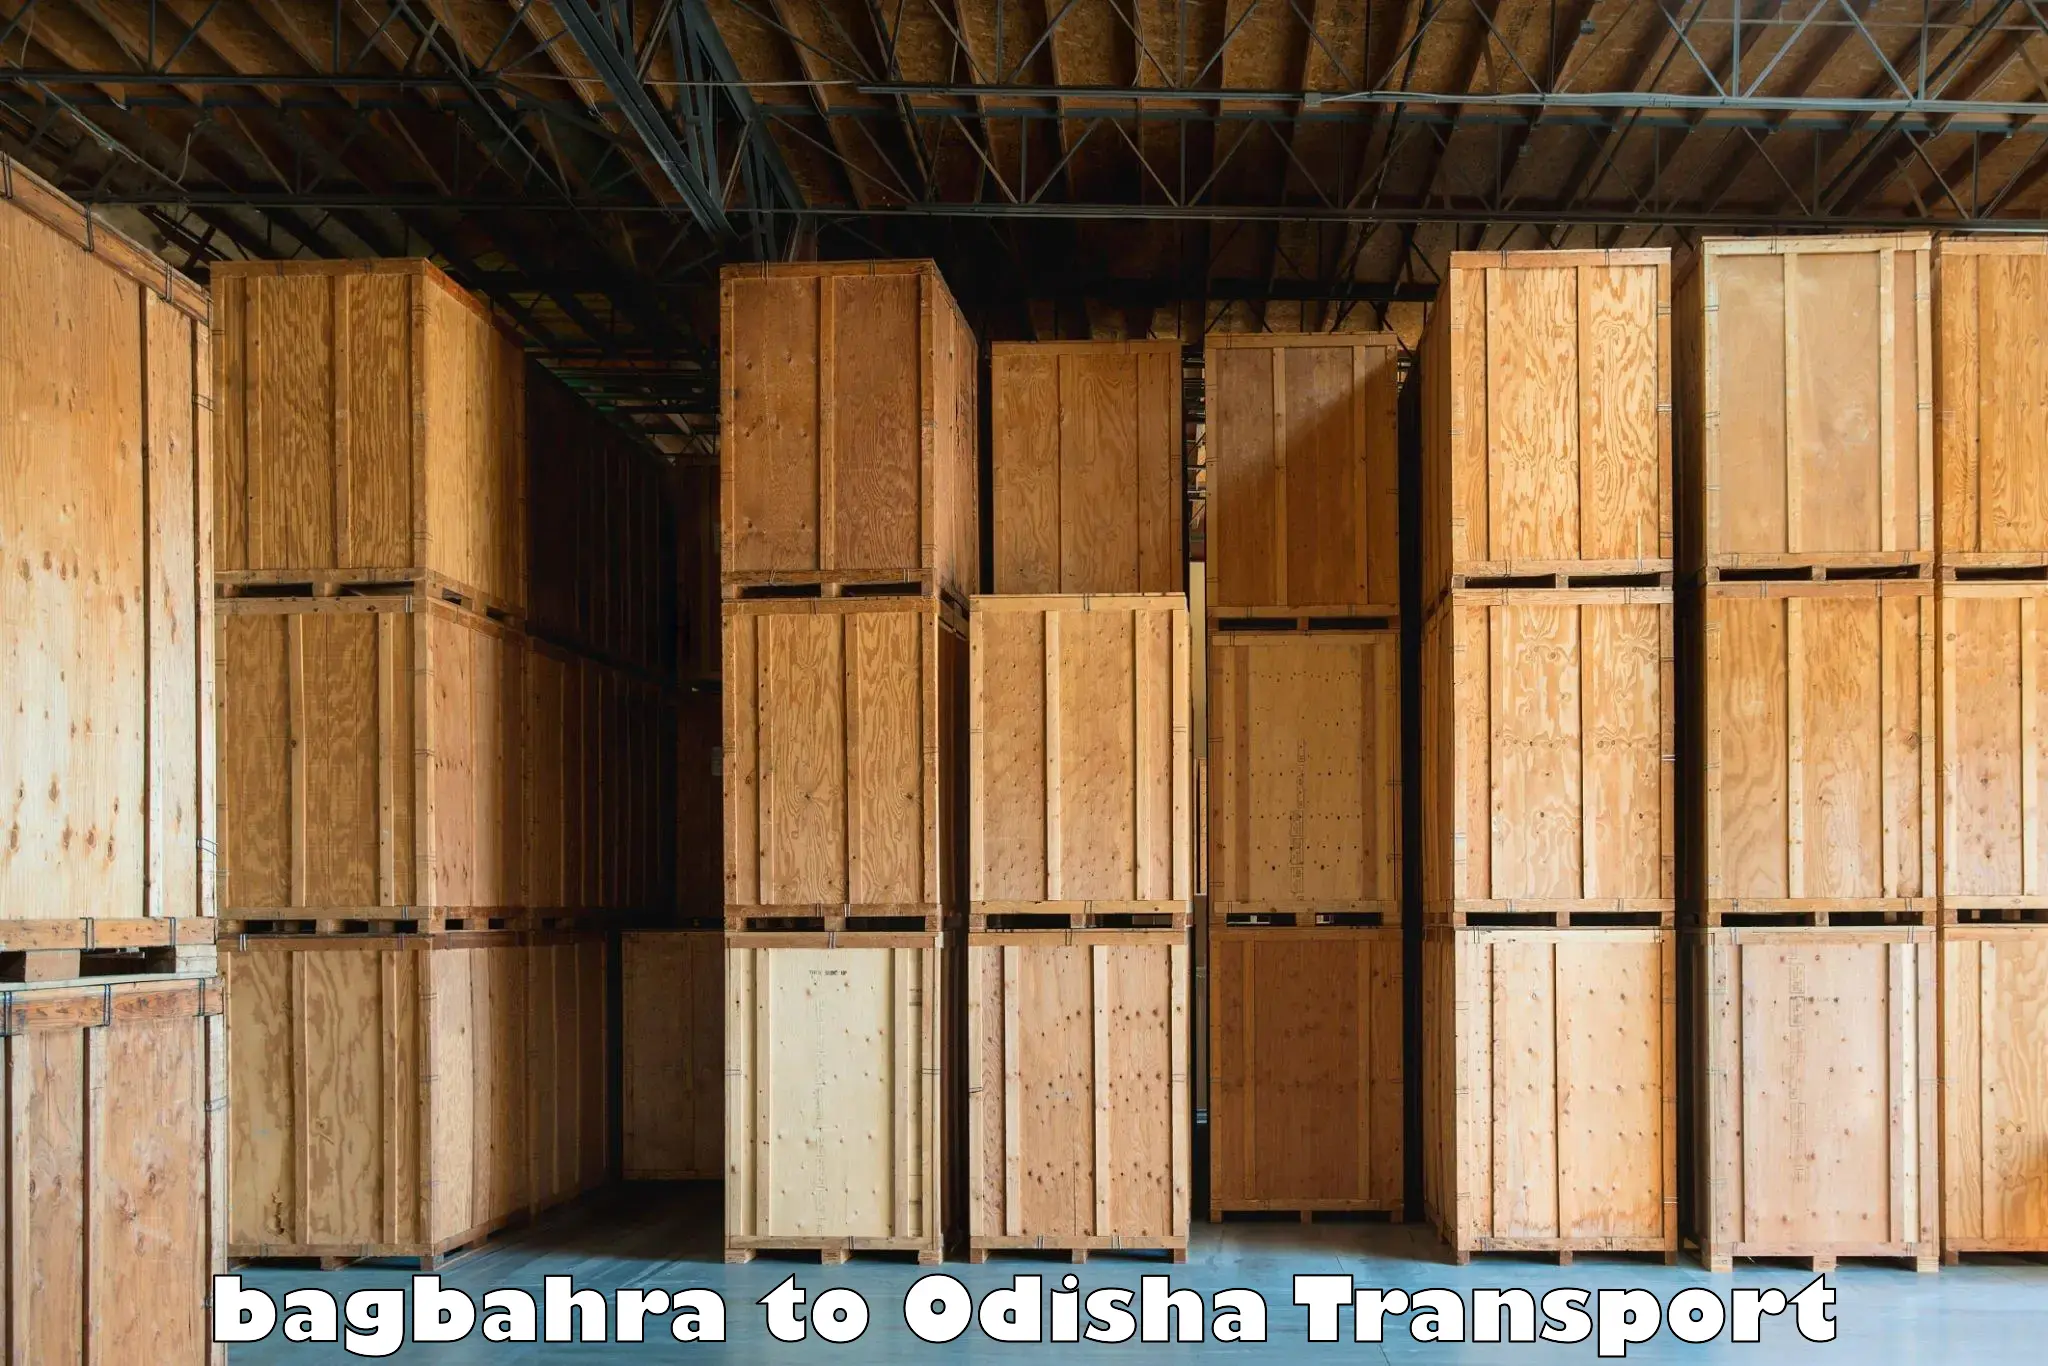 Daily parcel service transport bagbahra to Pallahara